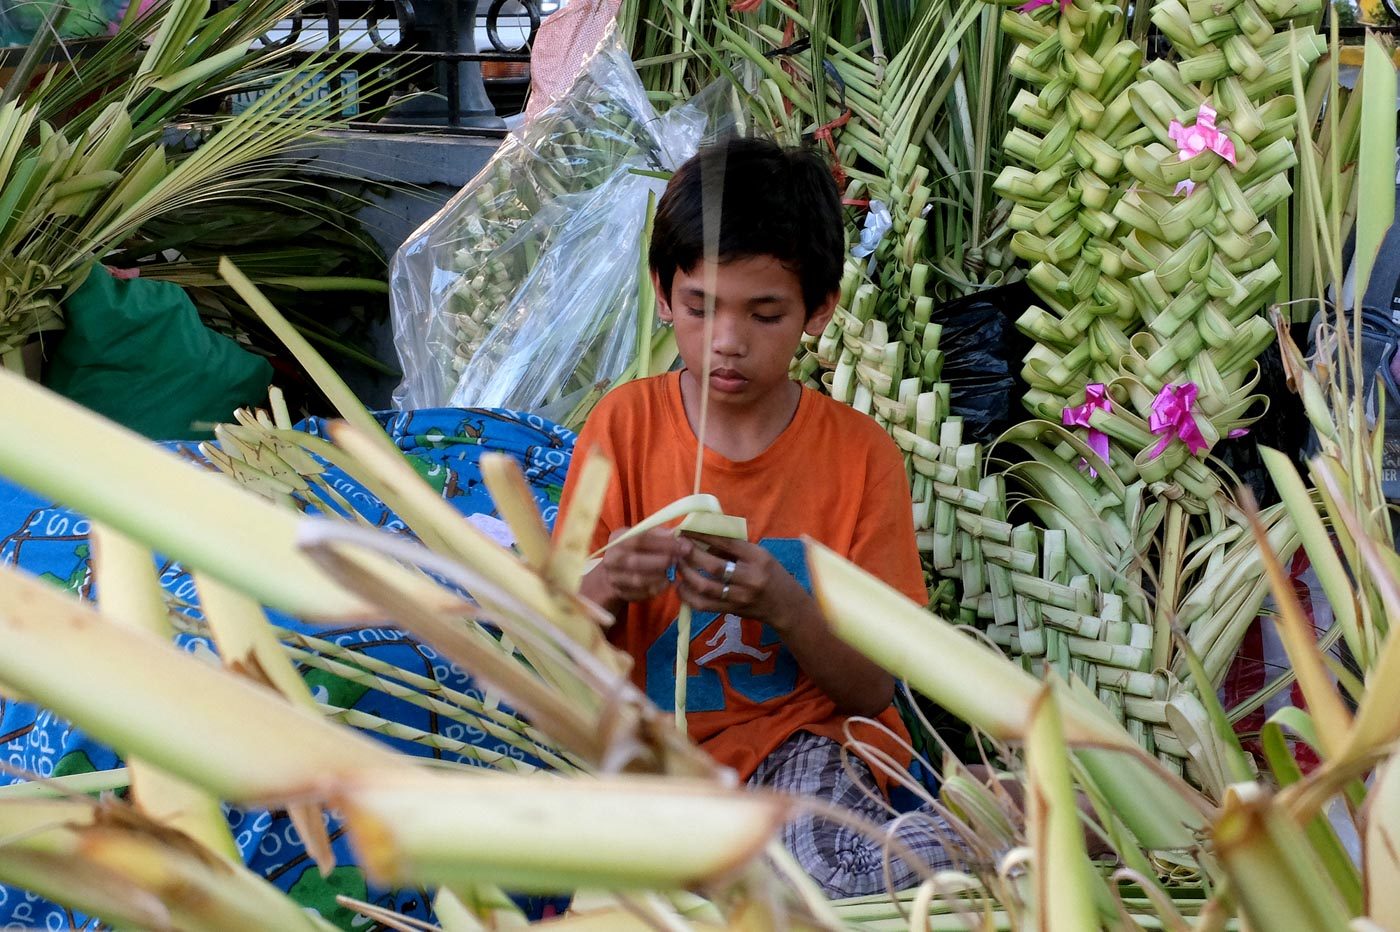 STARTING YOUNG. A boy makes a palaspas in front of the Sto Domingo church in Quezon City. Photo by Angie de Silva/Rappler   